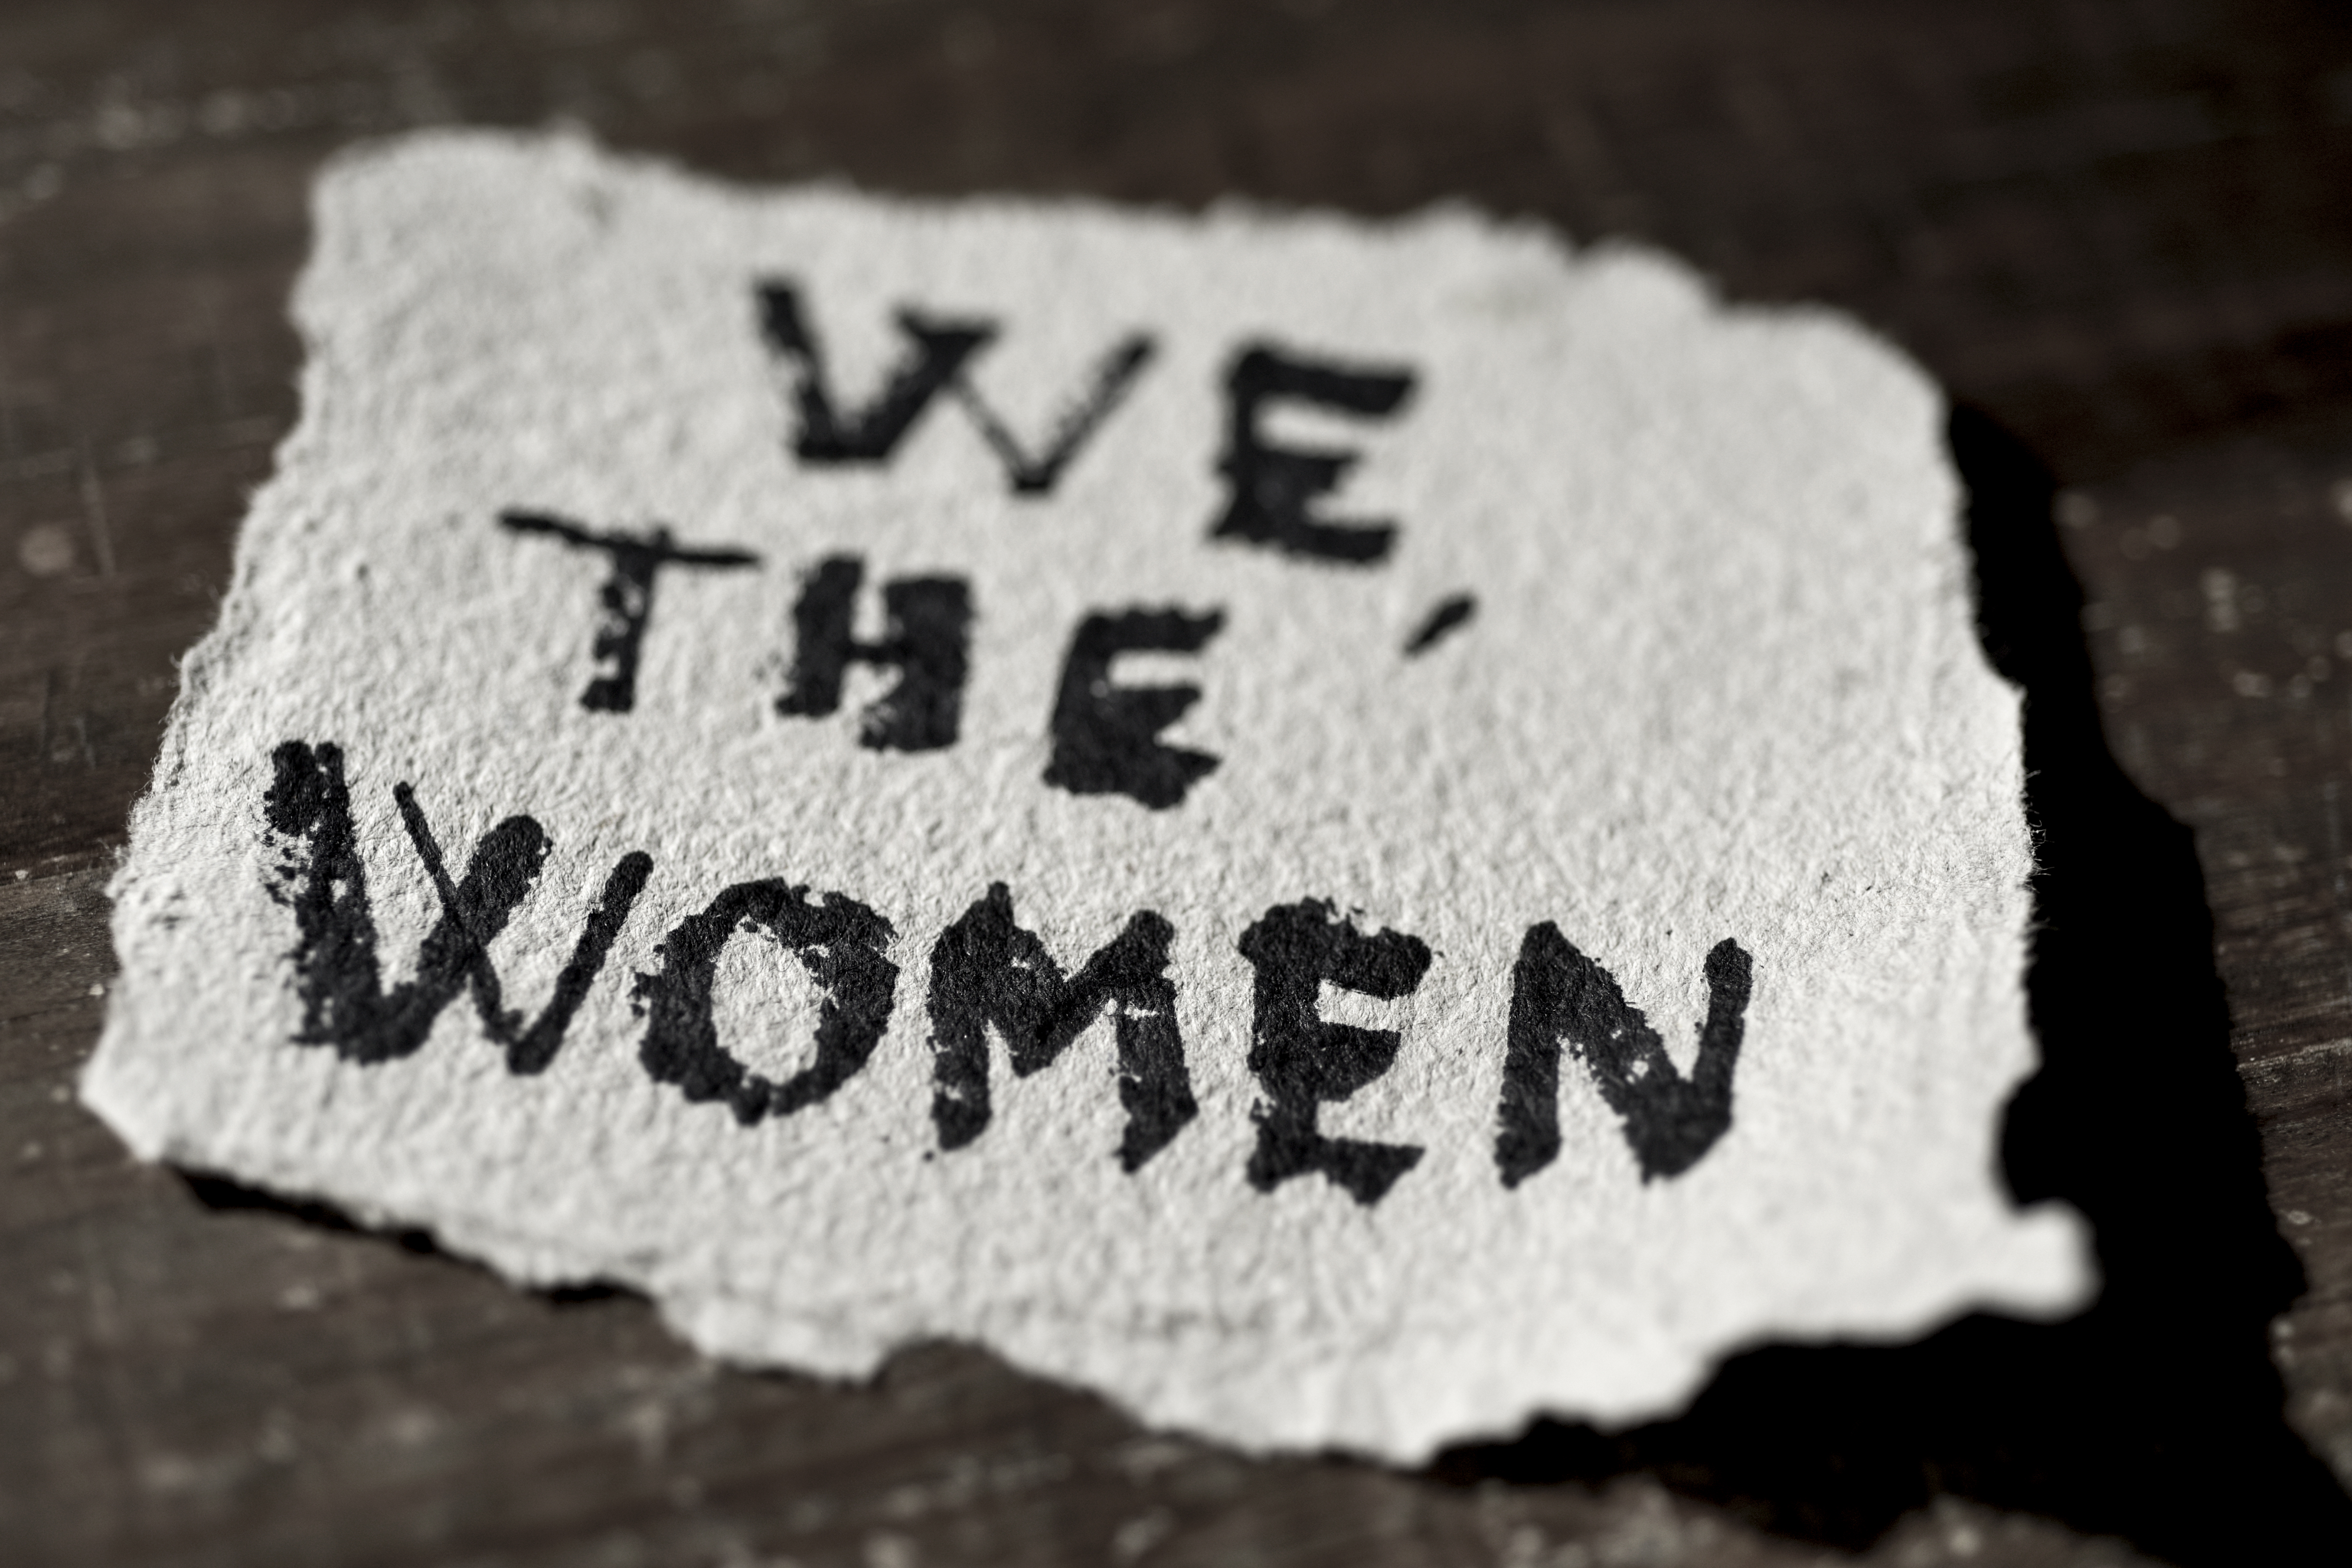 piece of paper with "We, the women" written in black ink.